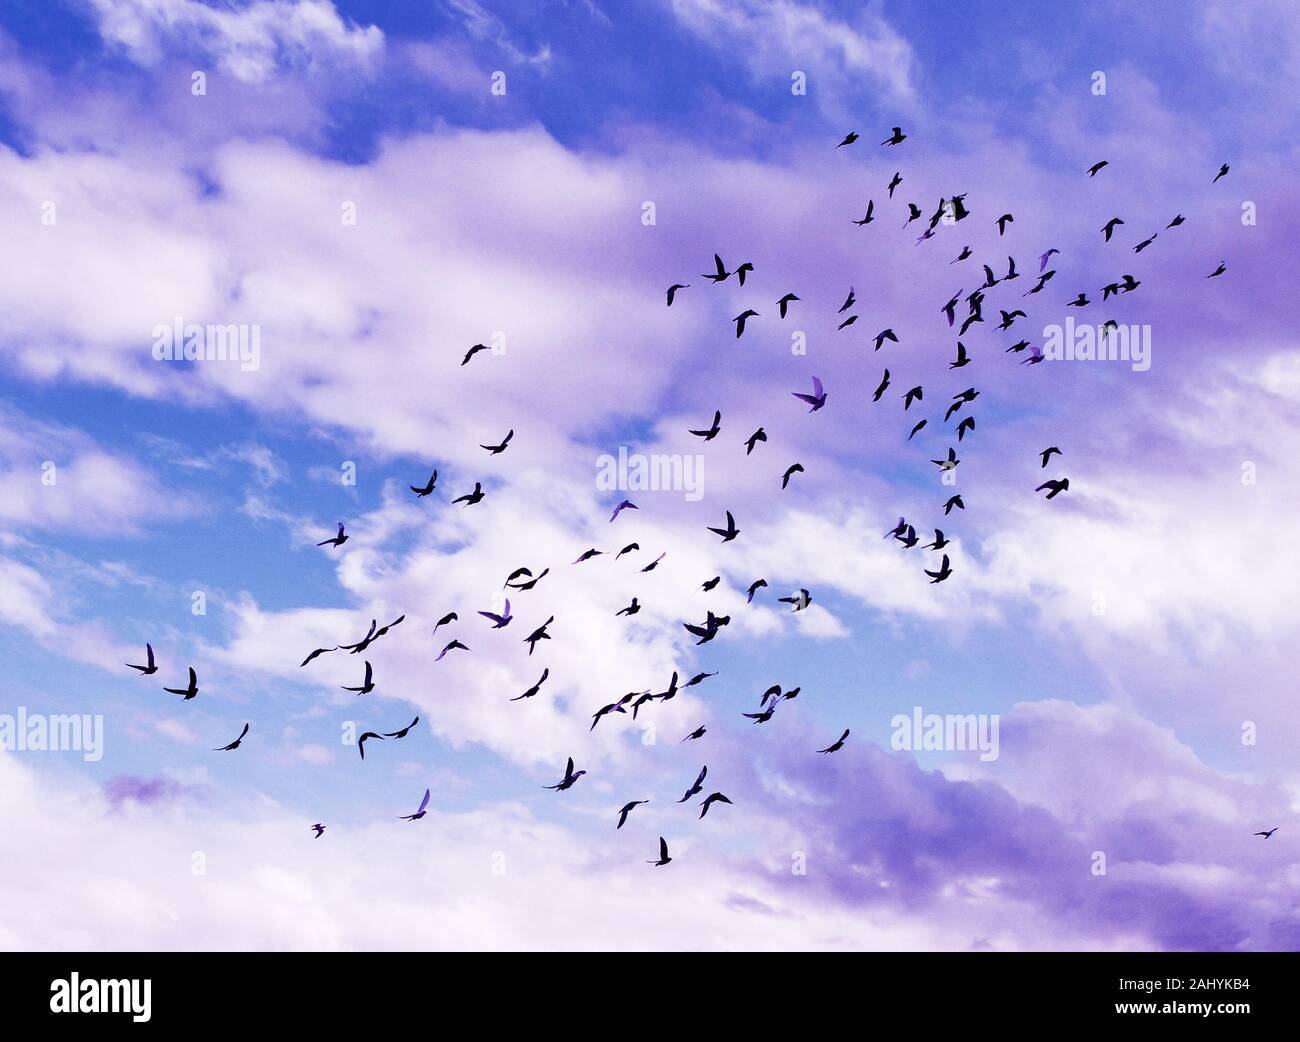 Many pigeons in blue sky background. Pigeons flying in the sky. Wild birds.  Dreams concept. Conceptual photo. Romantic Stock Photo - Alamy